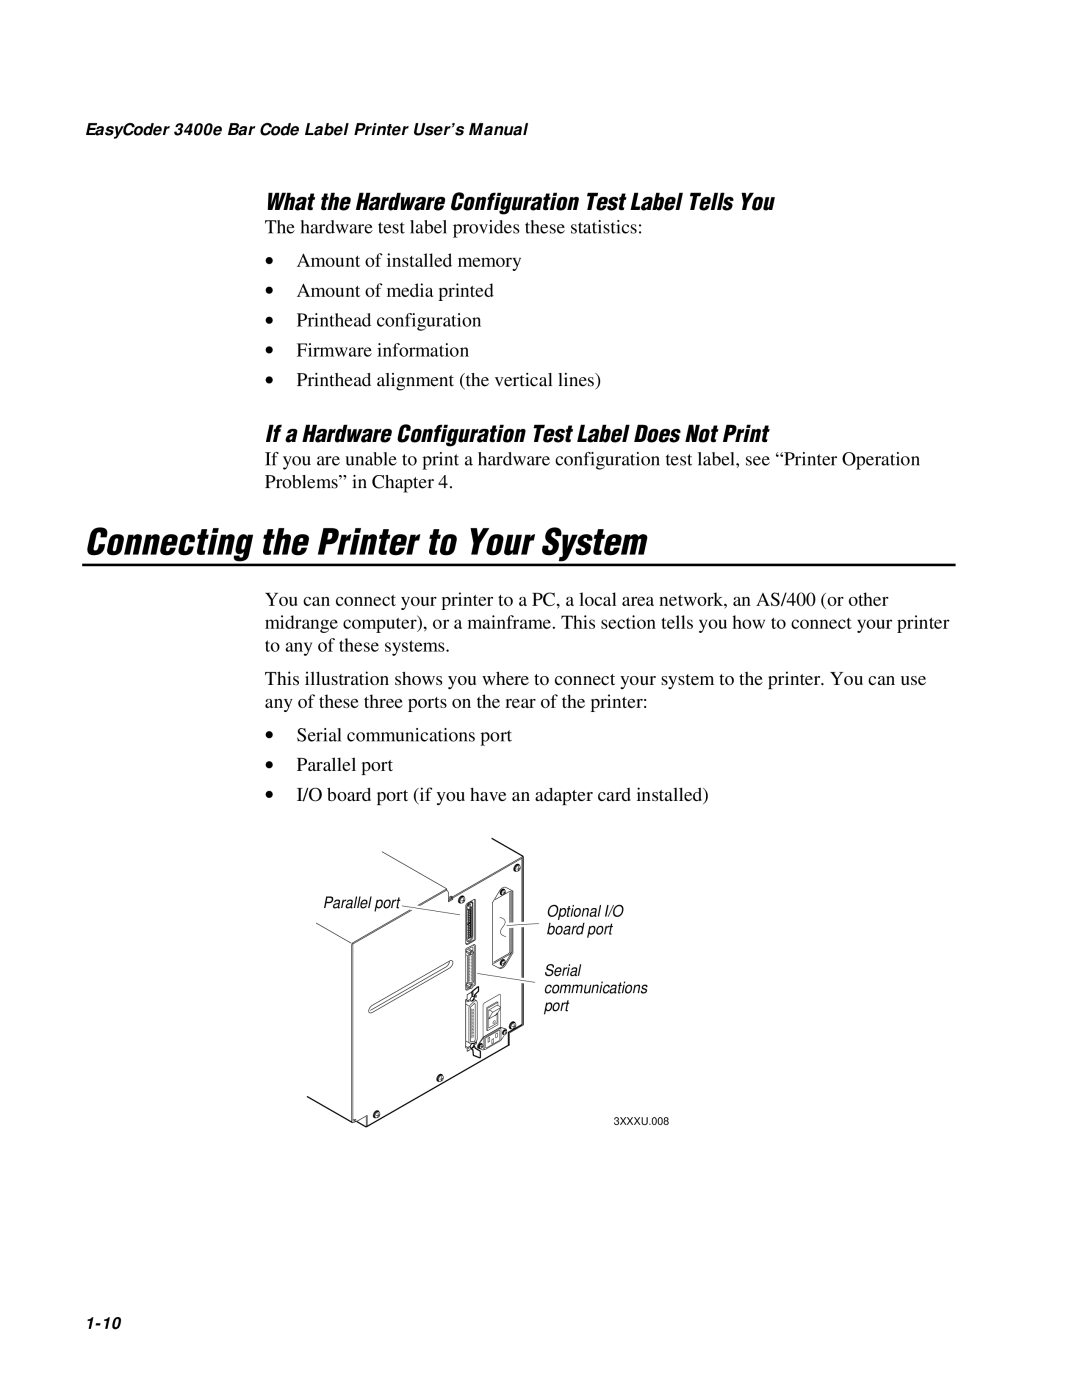 IBM EasyCoder 3400e Connecting the Printer to Your System, What the Hardware Configuration Test Label Tells You, 1-10 